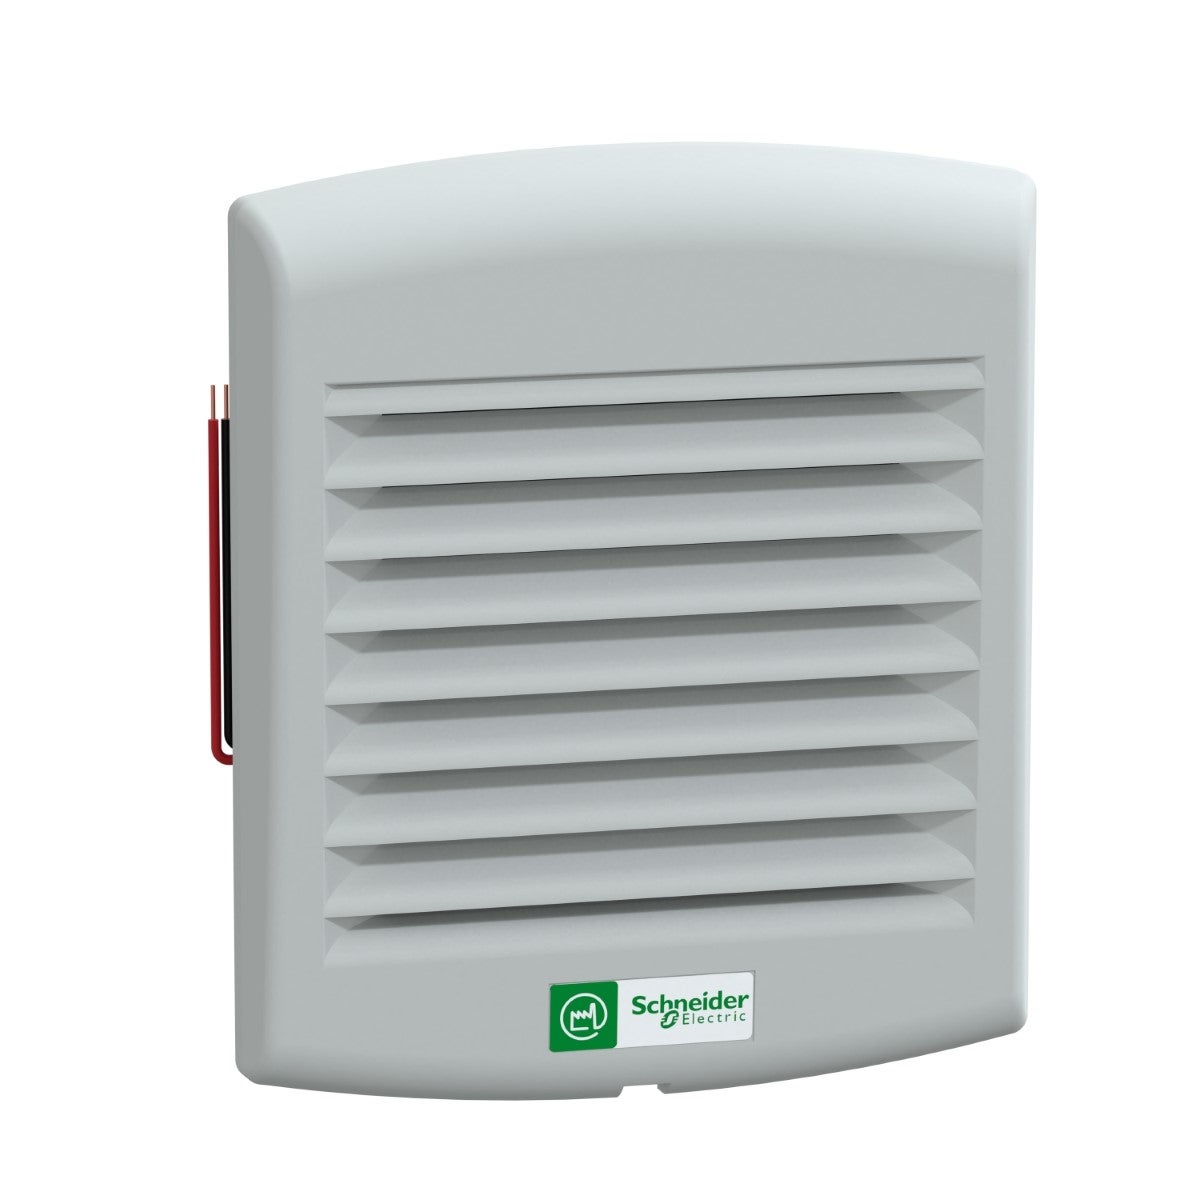 ClimaSys forced vent. IP54, 58m3/h, 24V DC, with outlet grille and filter G2